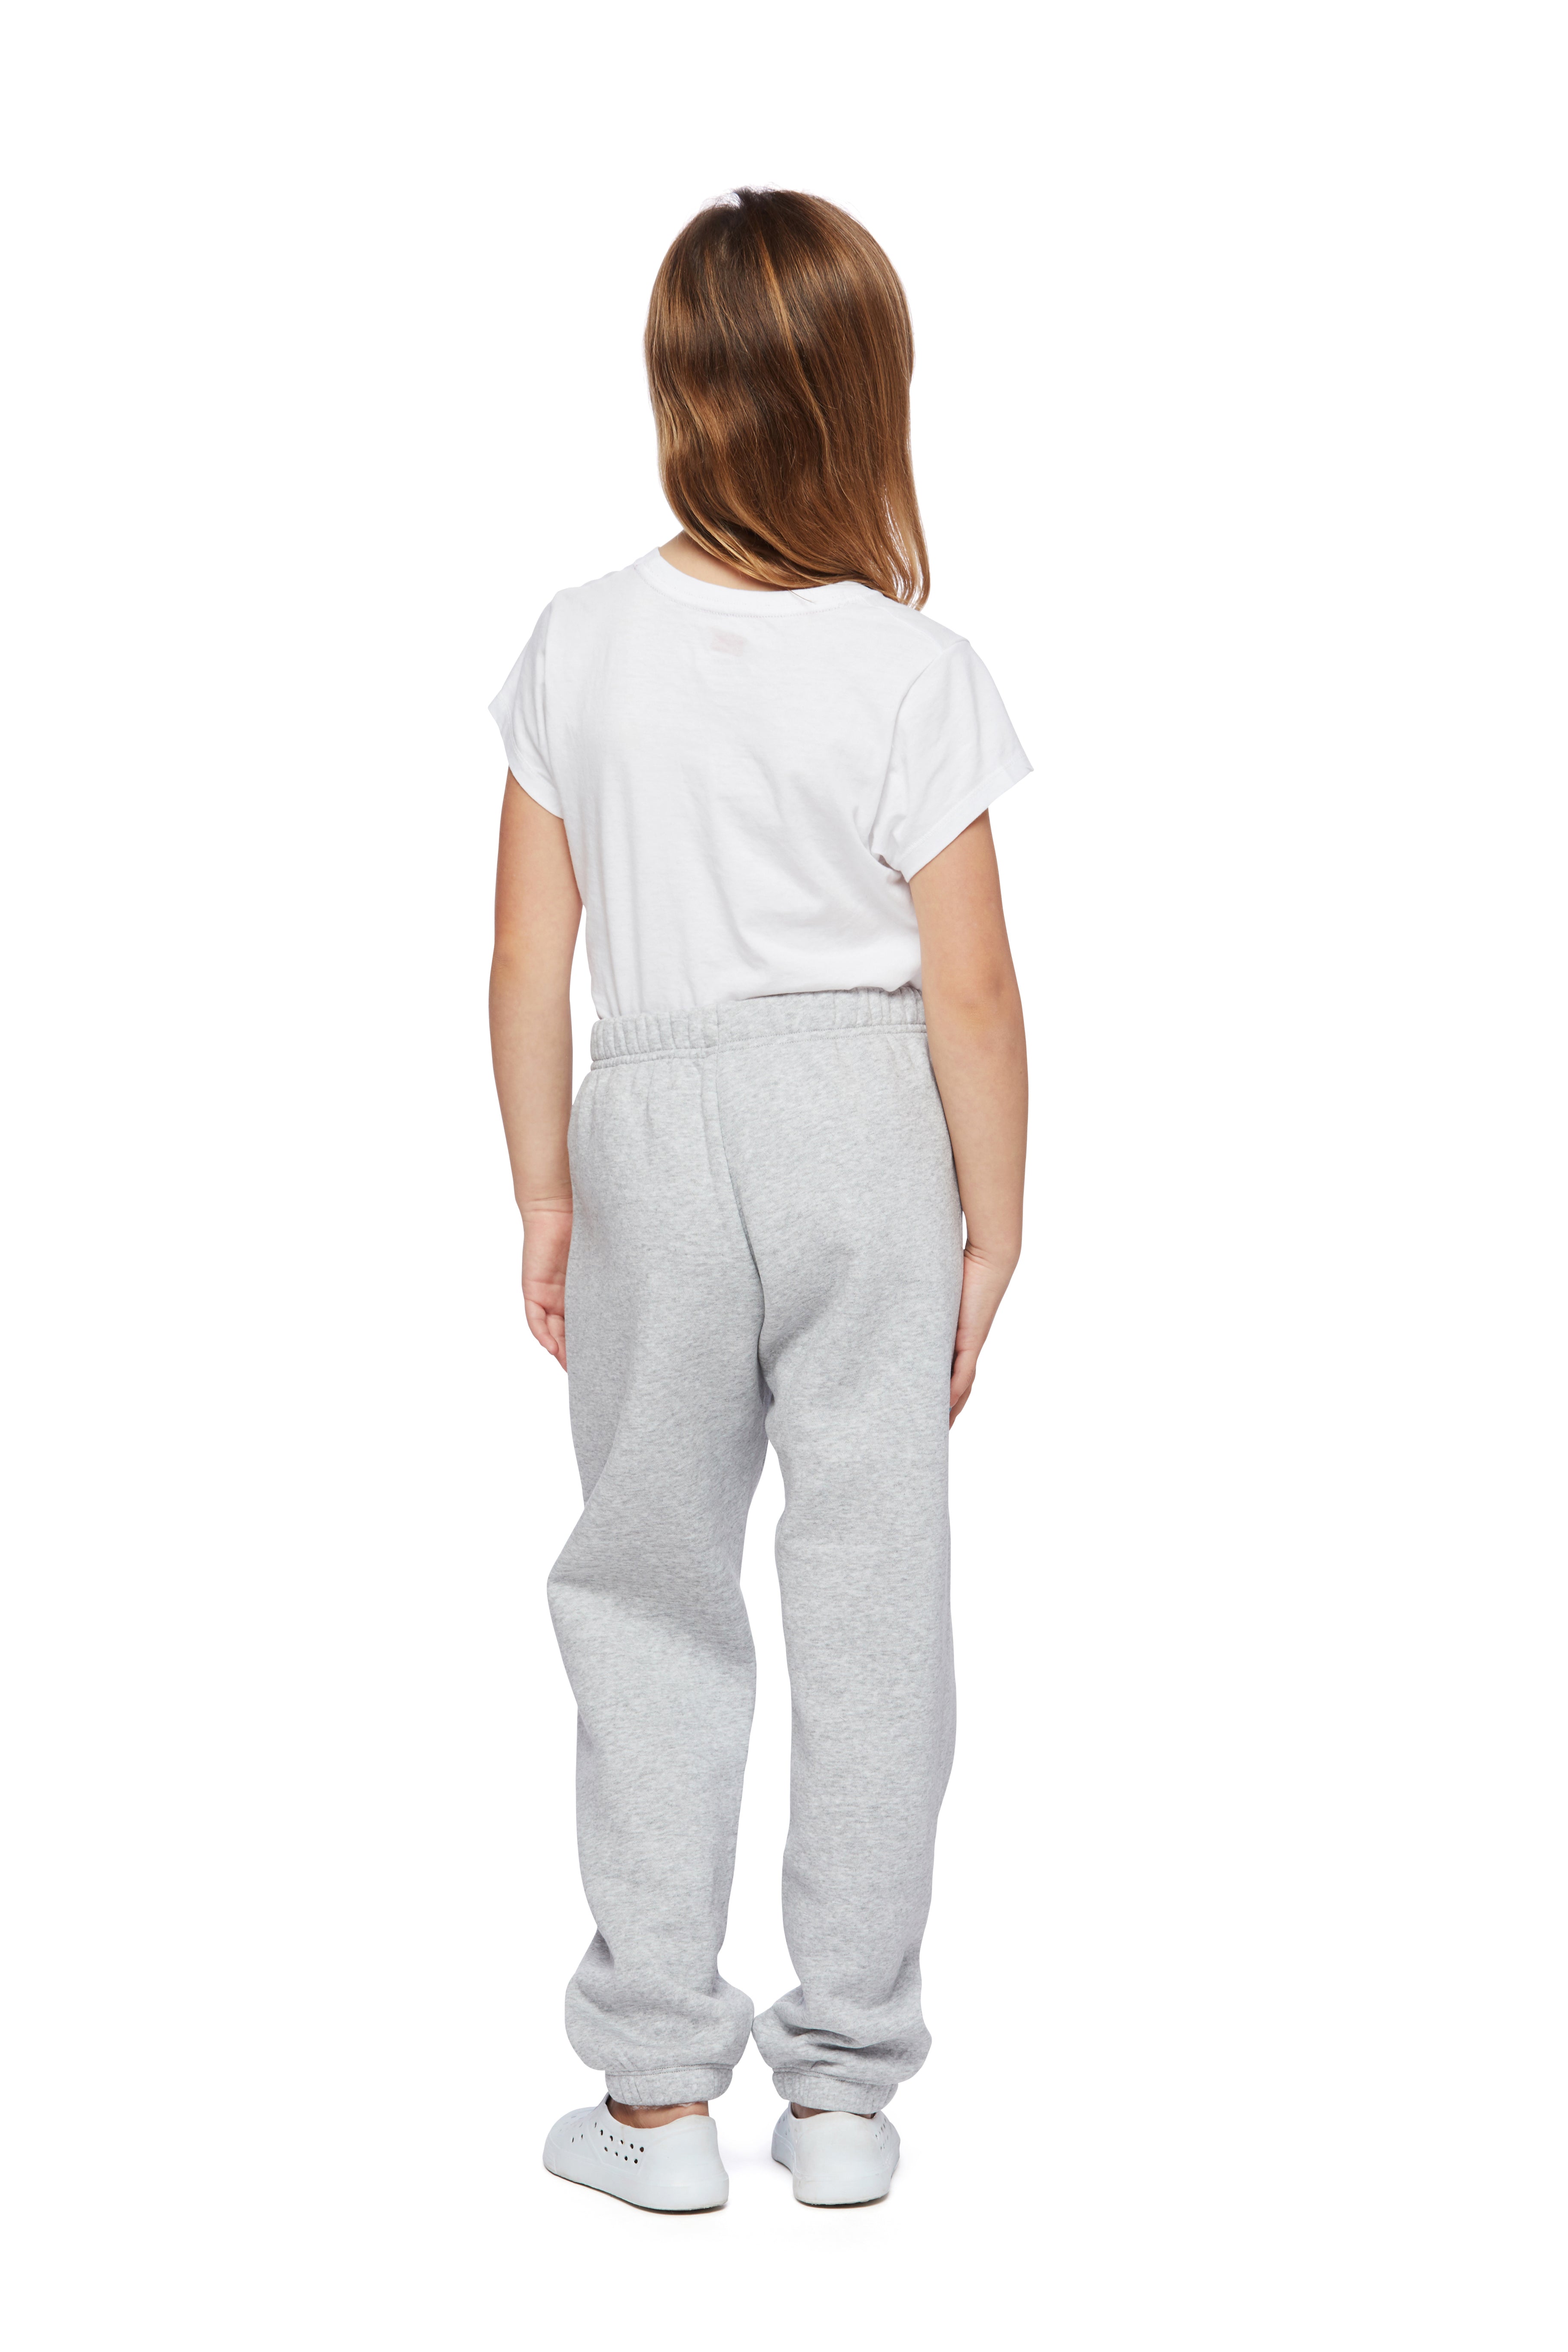 Niki Original kids sweatpants in classic grey from Lazypants - always a great buy at a reasonable price.